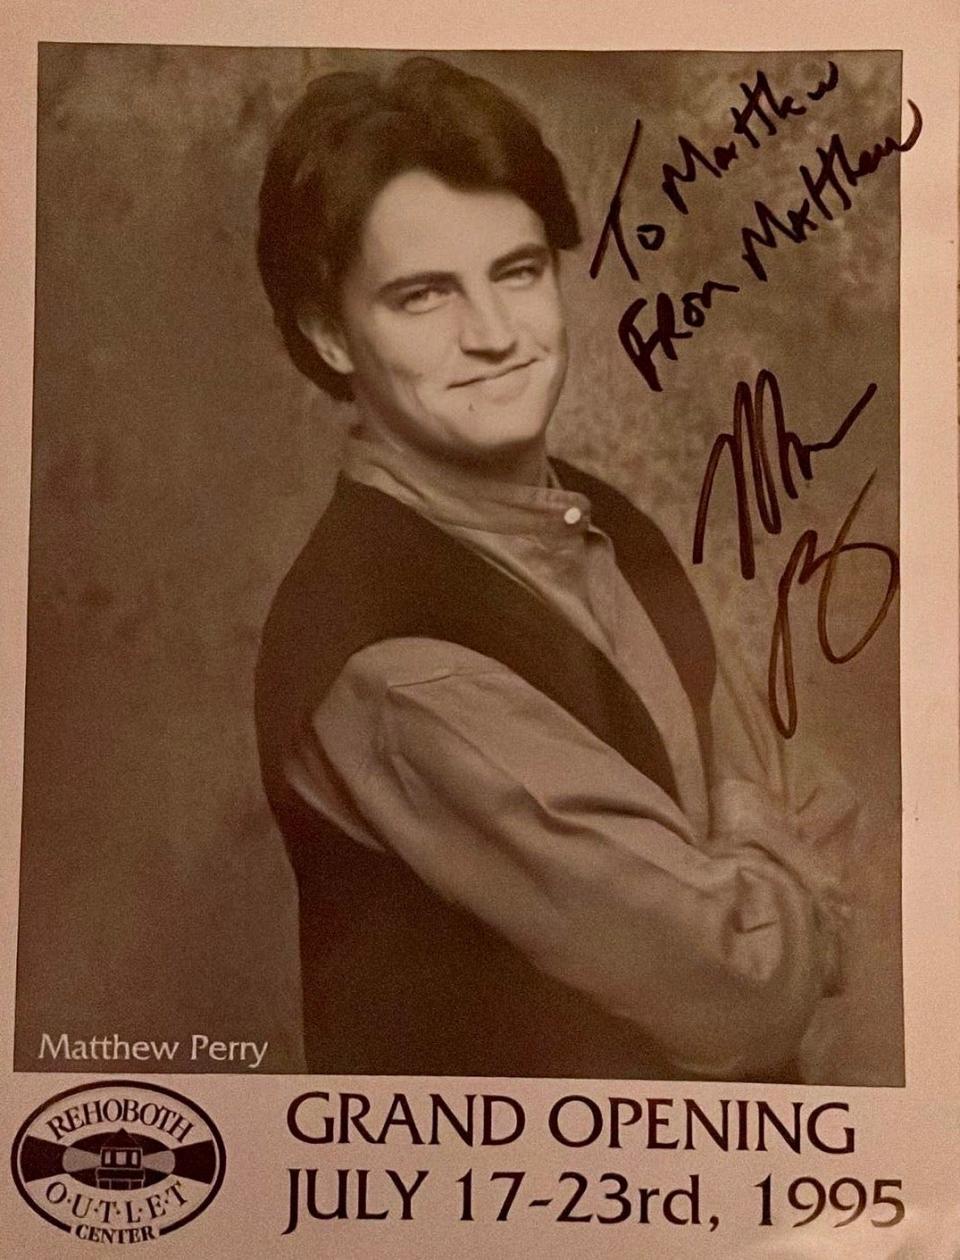 Smyrna native Matt O'Neal's autograph from Matthew Perry received in 1995 at the Tanger Outlets grand opening near Rehoboth Beach.